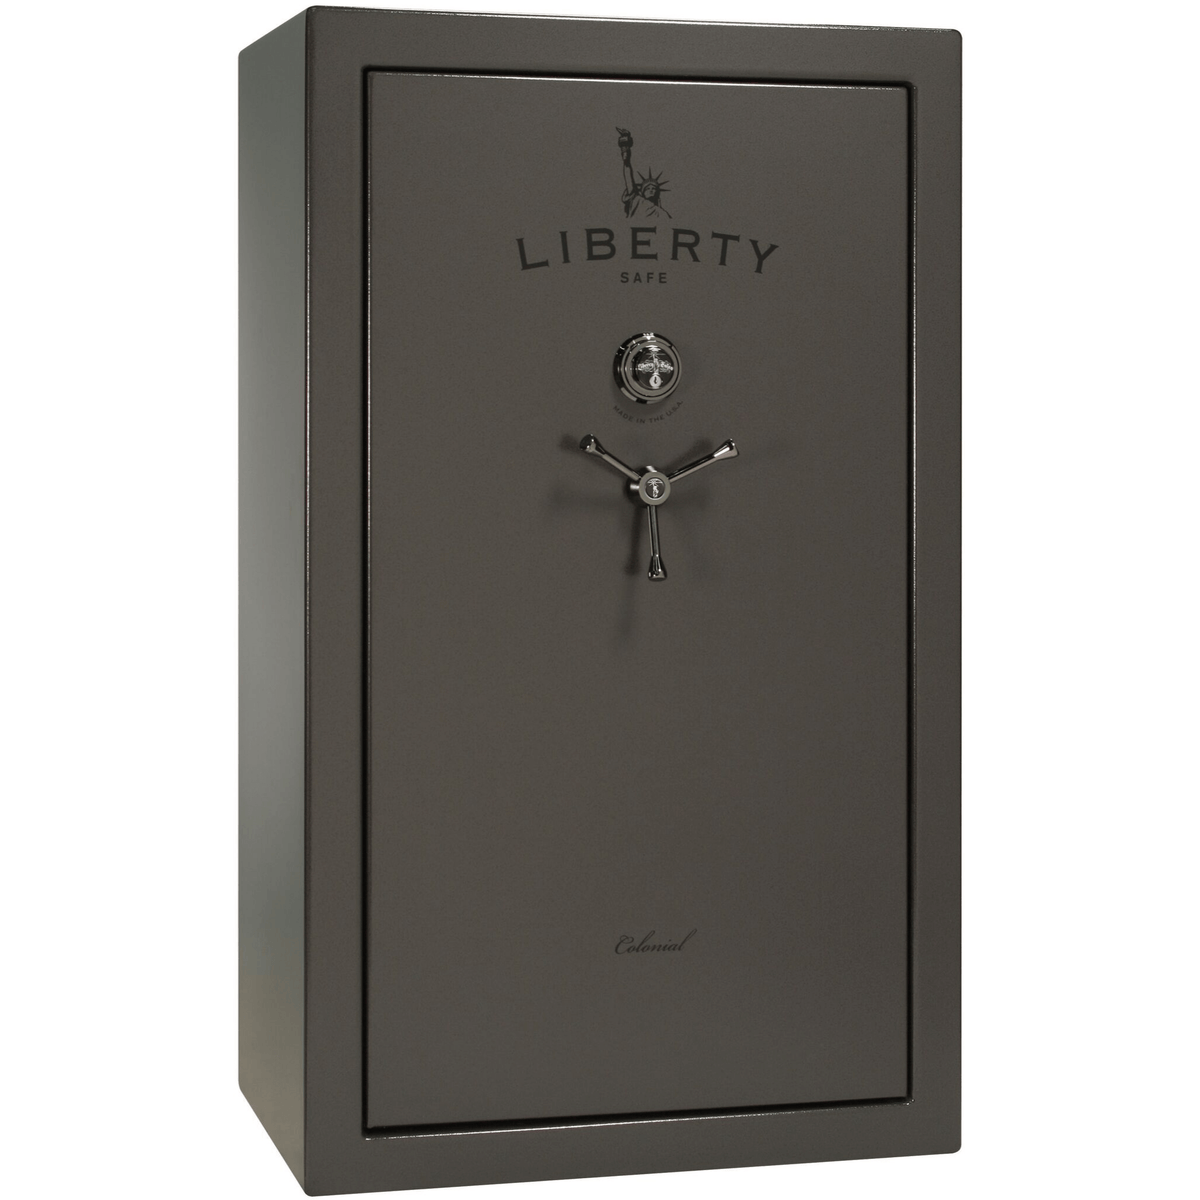 Liberty Colonial 30 Safe in Gray Marble with Black Chrome Mechanical Lock.